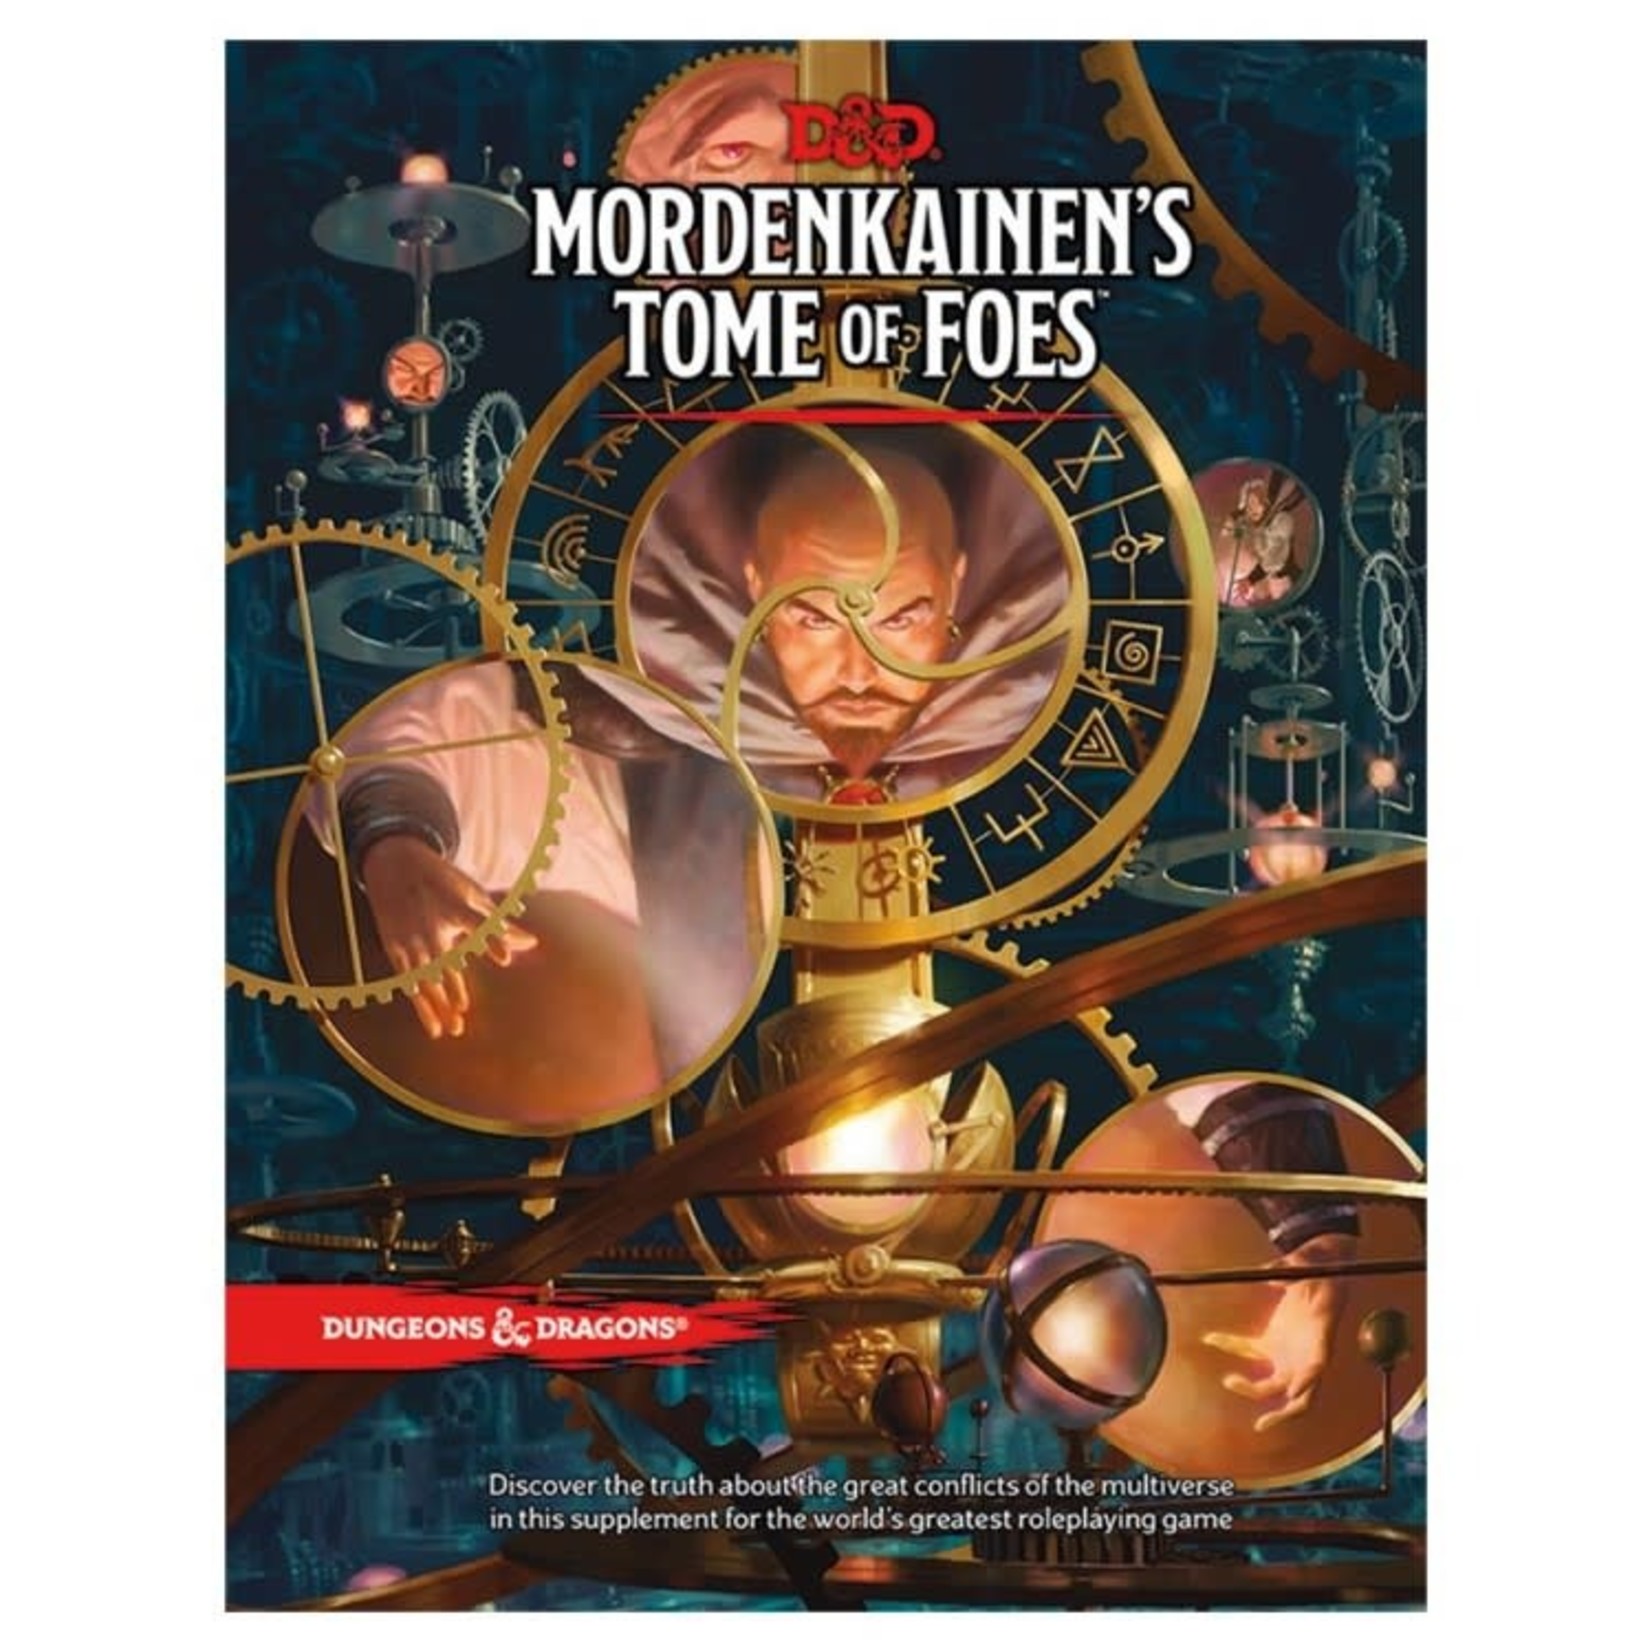 Dungeons & Dragons D&D – Mordenkainen's Tome of Foes (5th Edition)